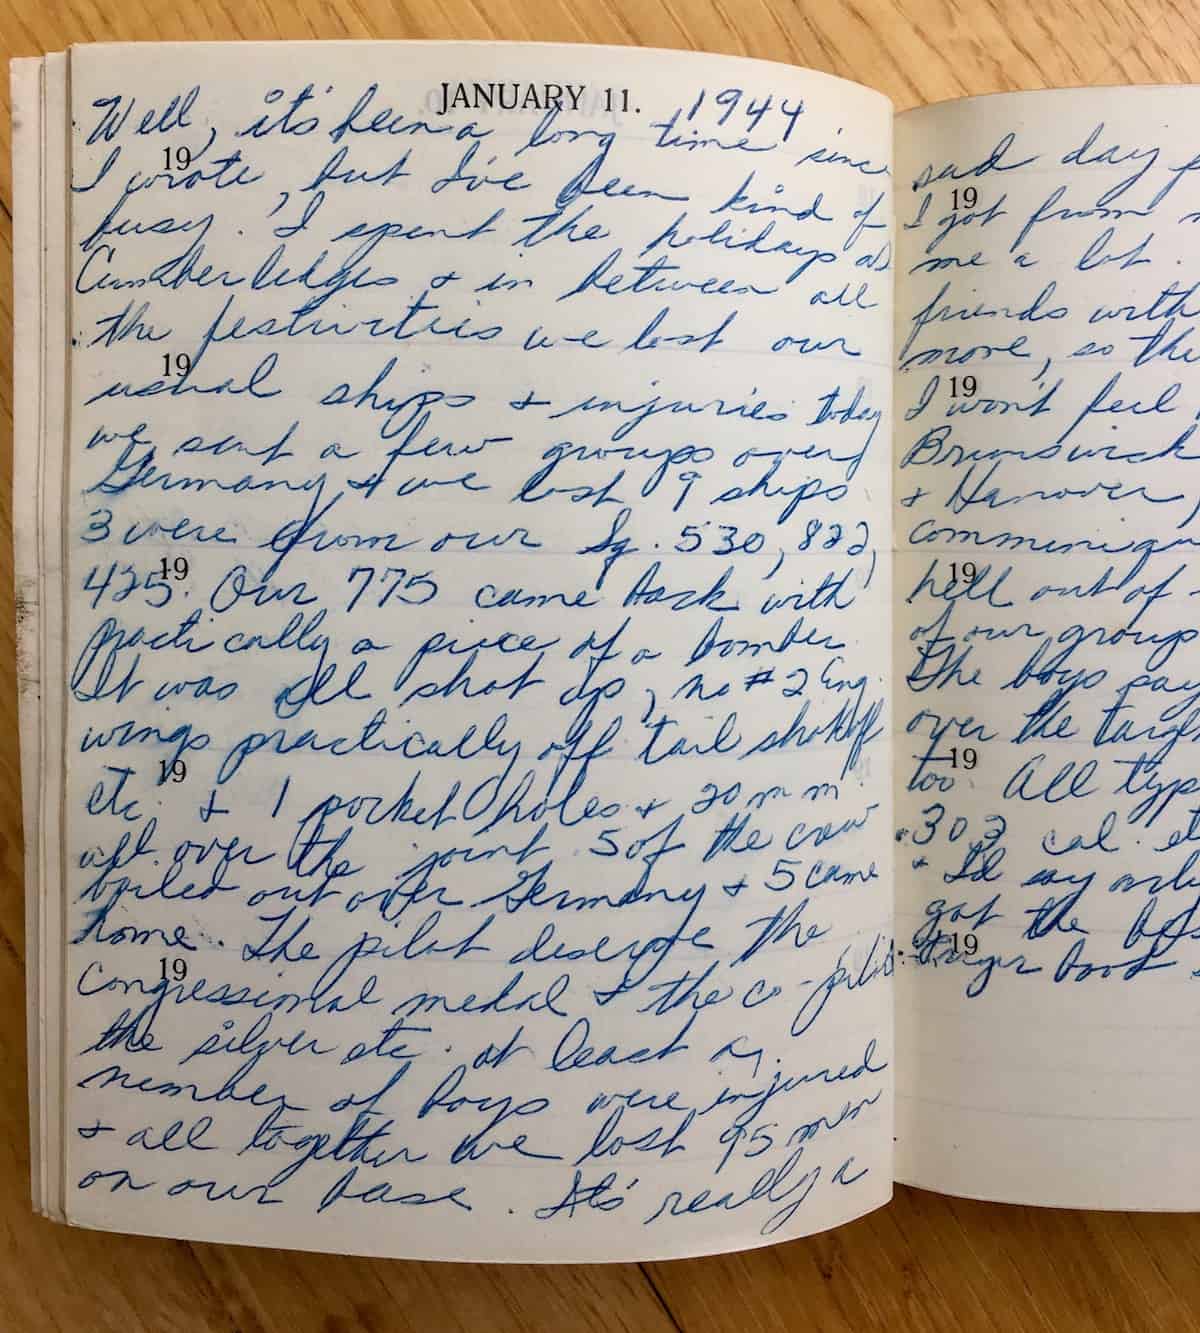 my dad's military diary